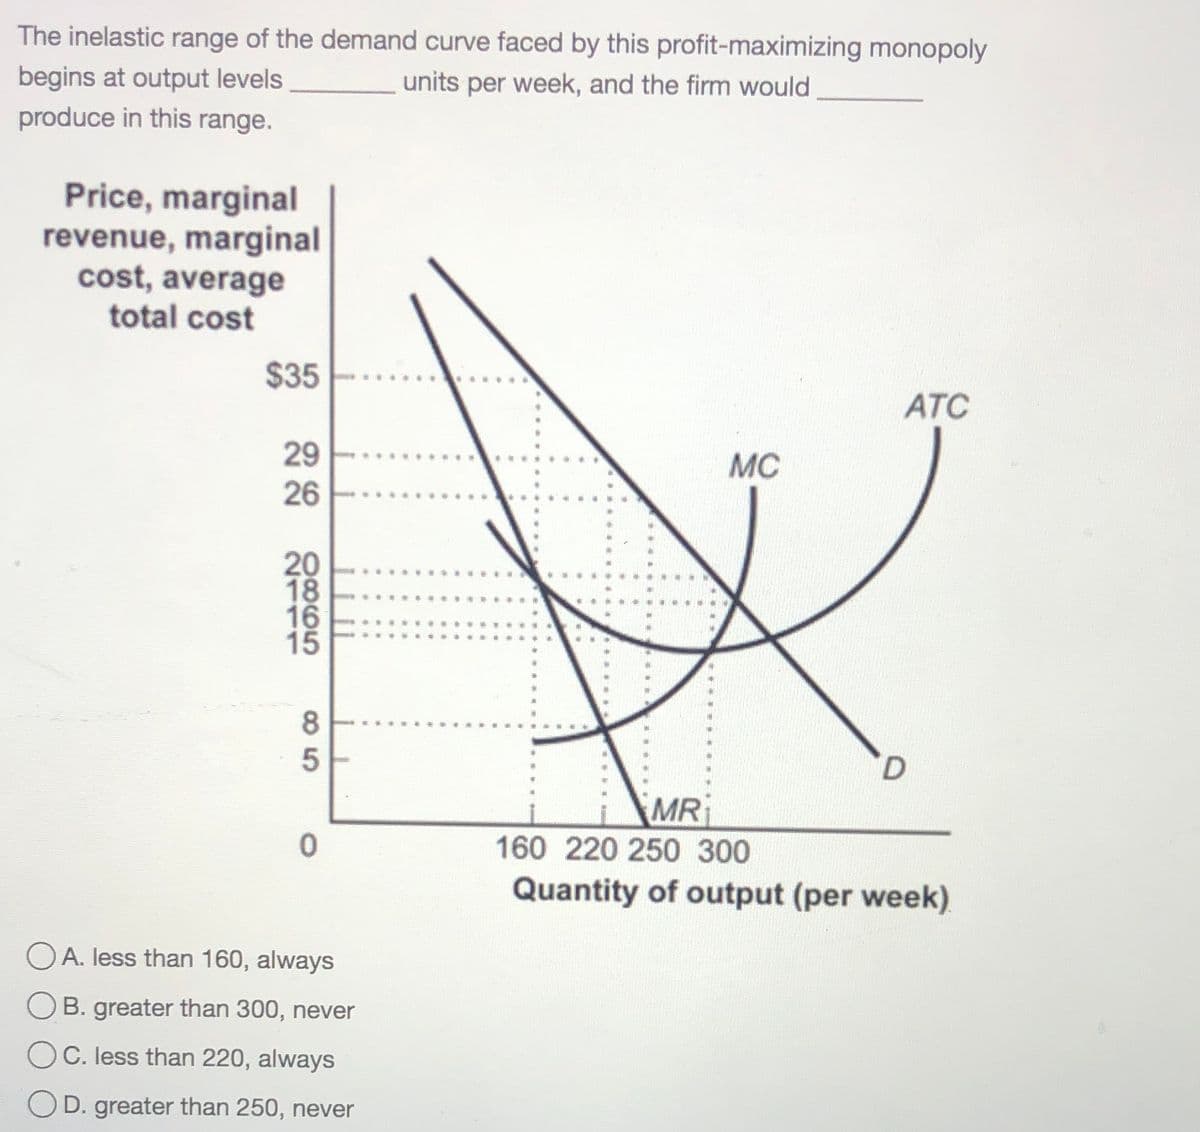 The inelastic range of the demand curve faced by this profit-maximizing monopoly
begins at output levels
units per week, and the firm would
produce in this range.
Price, marginal
revenue, marginal
cost, average
total cost
$35
....
ATC
29
MC
26
20
18
16
15
|単 单
D.
MR
160 220 250 300
Quantity of output (per week).
OA. less than 160, always
B. greater than 300, never
OC. less than 220, always
OD. greater than 250, never
LLLN
